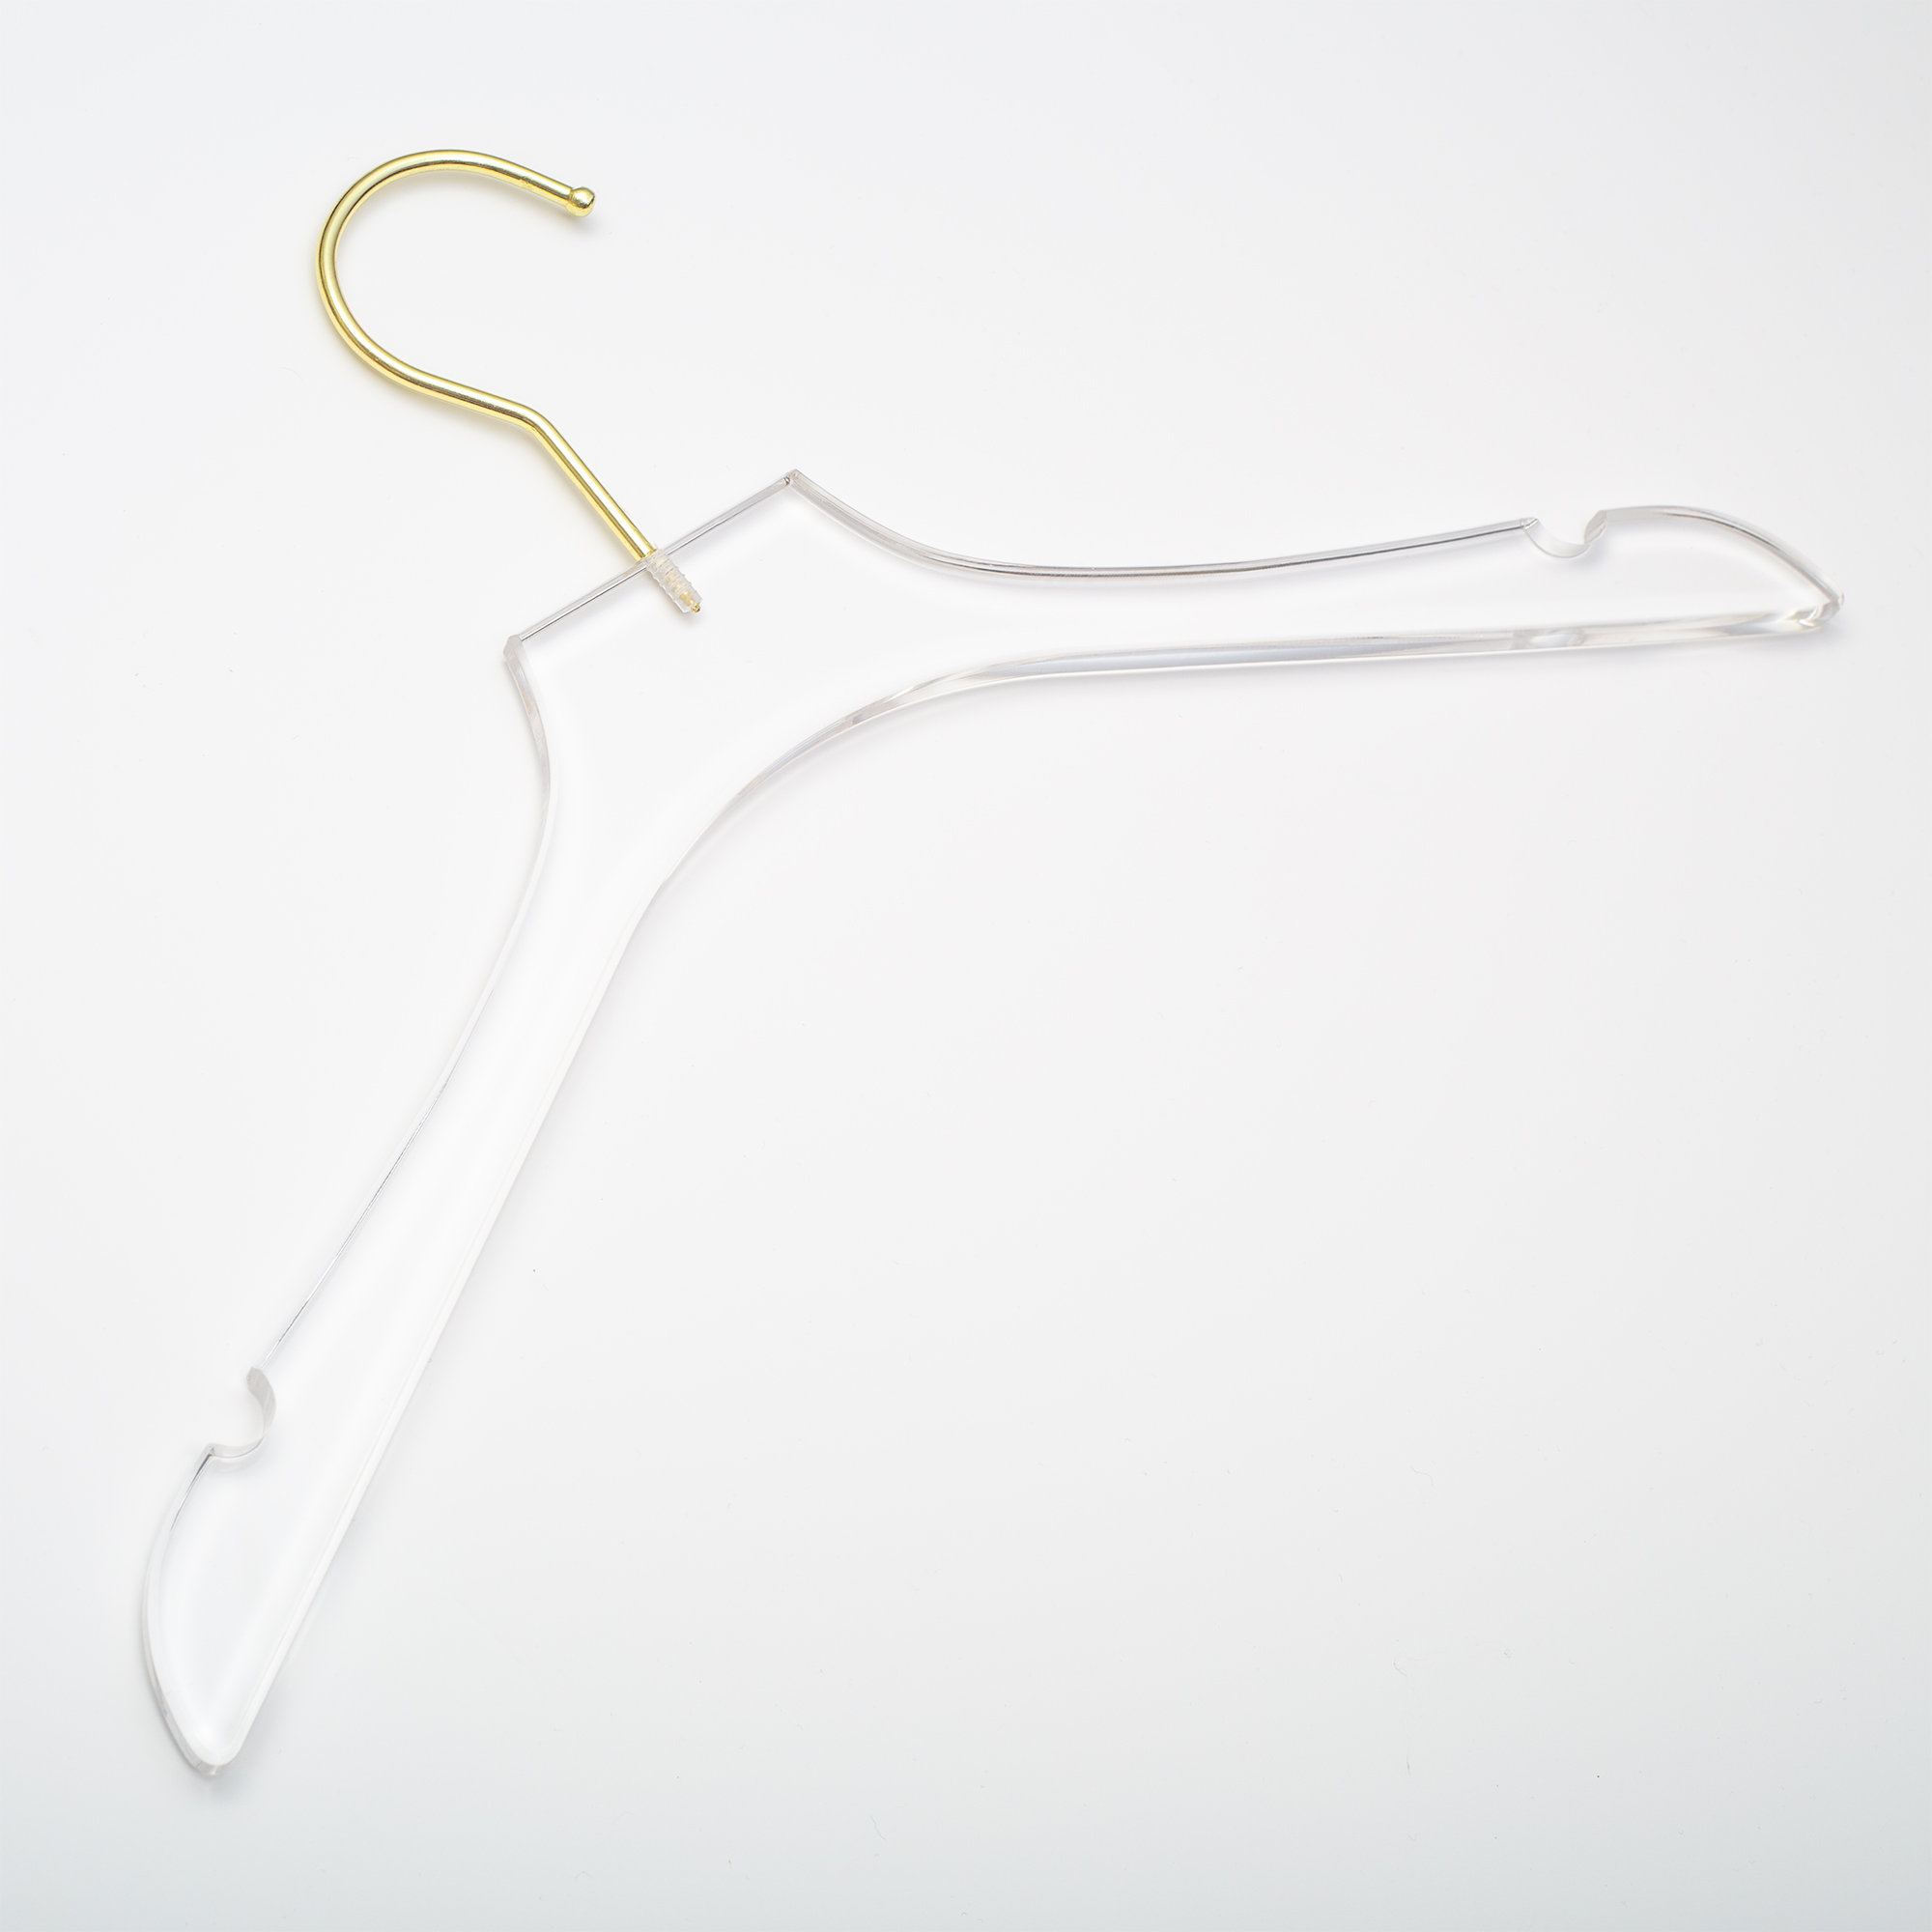 Acrylic Baby Clothes Standard Hanger for Dress/Shirt/Sweater Quality Hangers Color: Acrylic/ Black